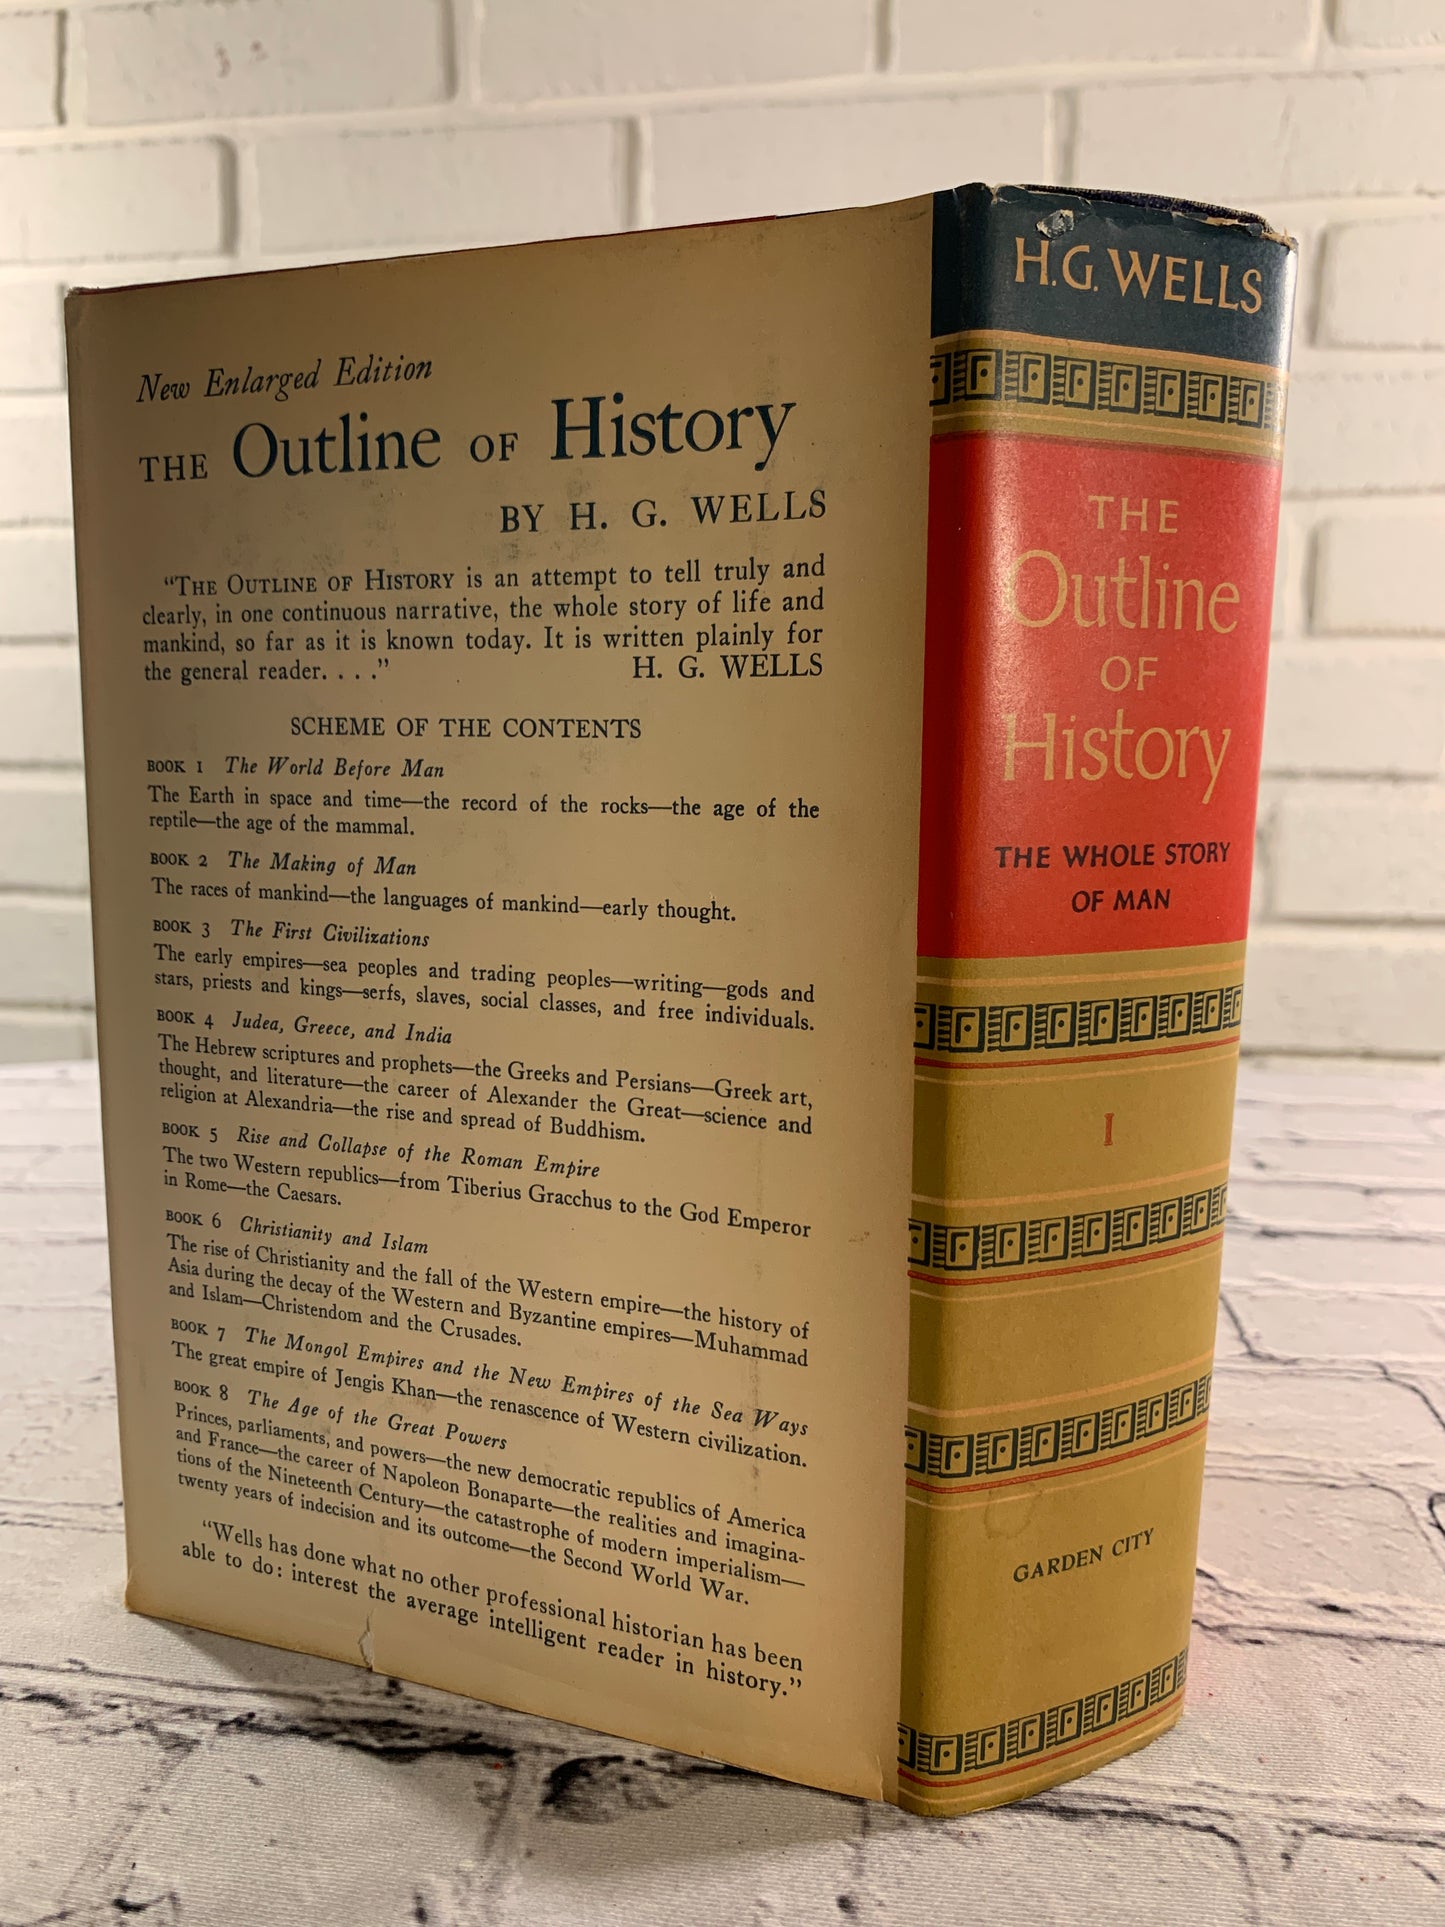 The Outline of History by H.G. Wells [BCE · Enlarged Edition · Volume 1]